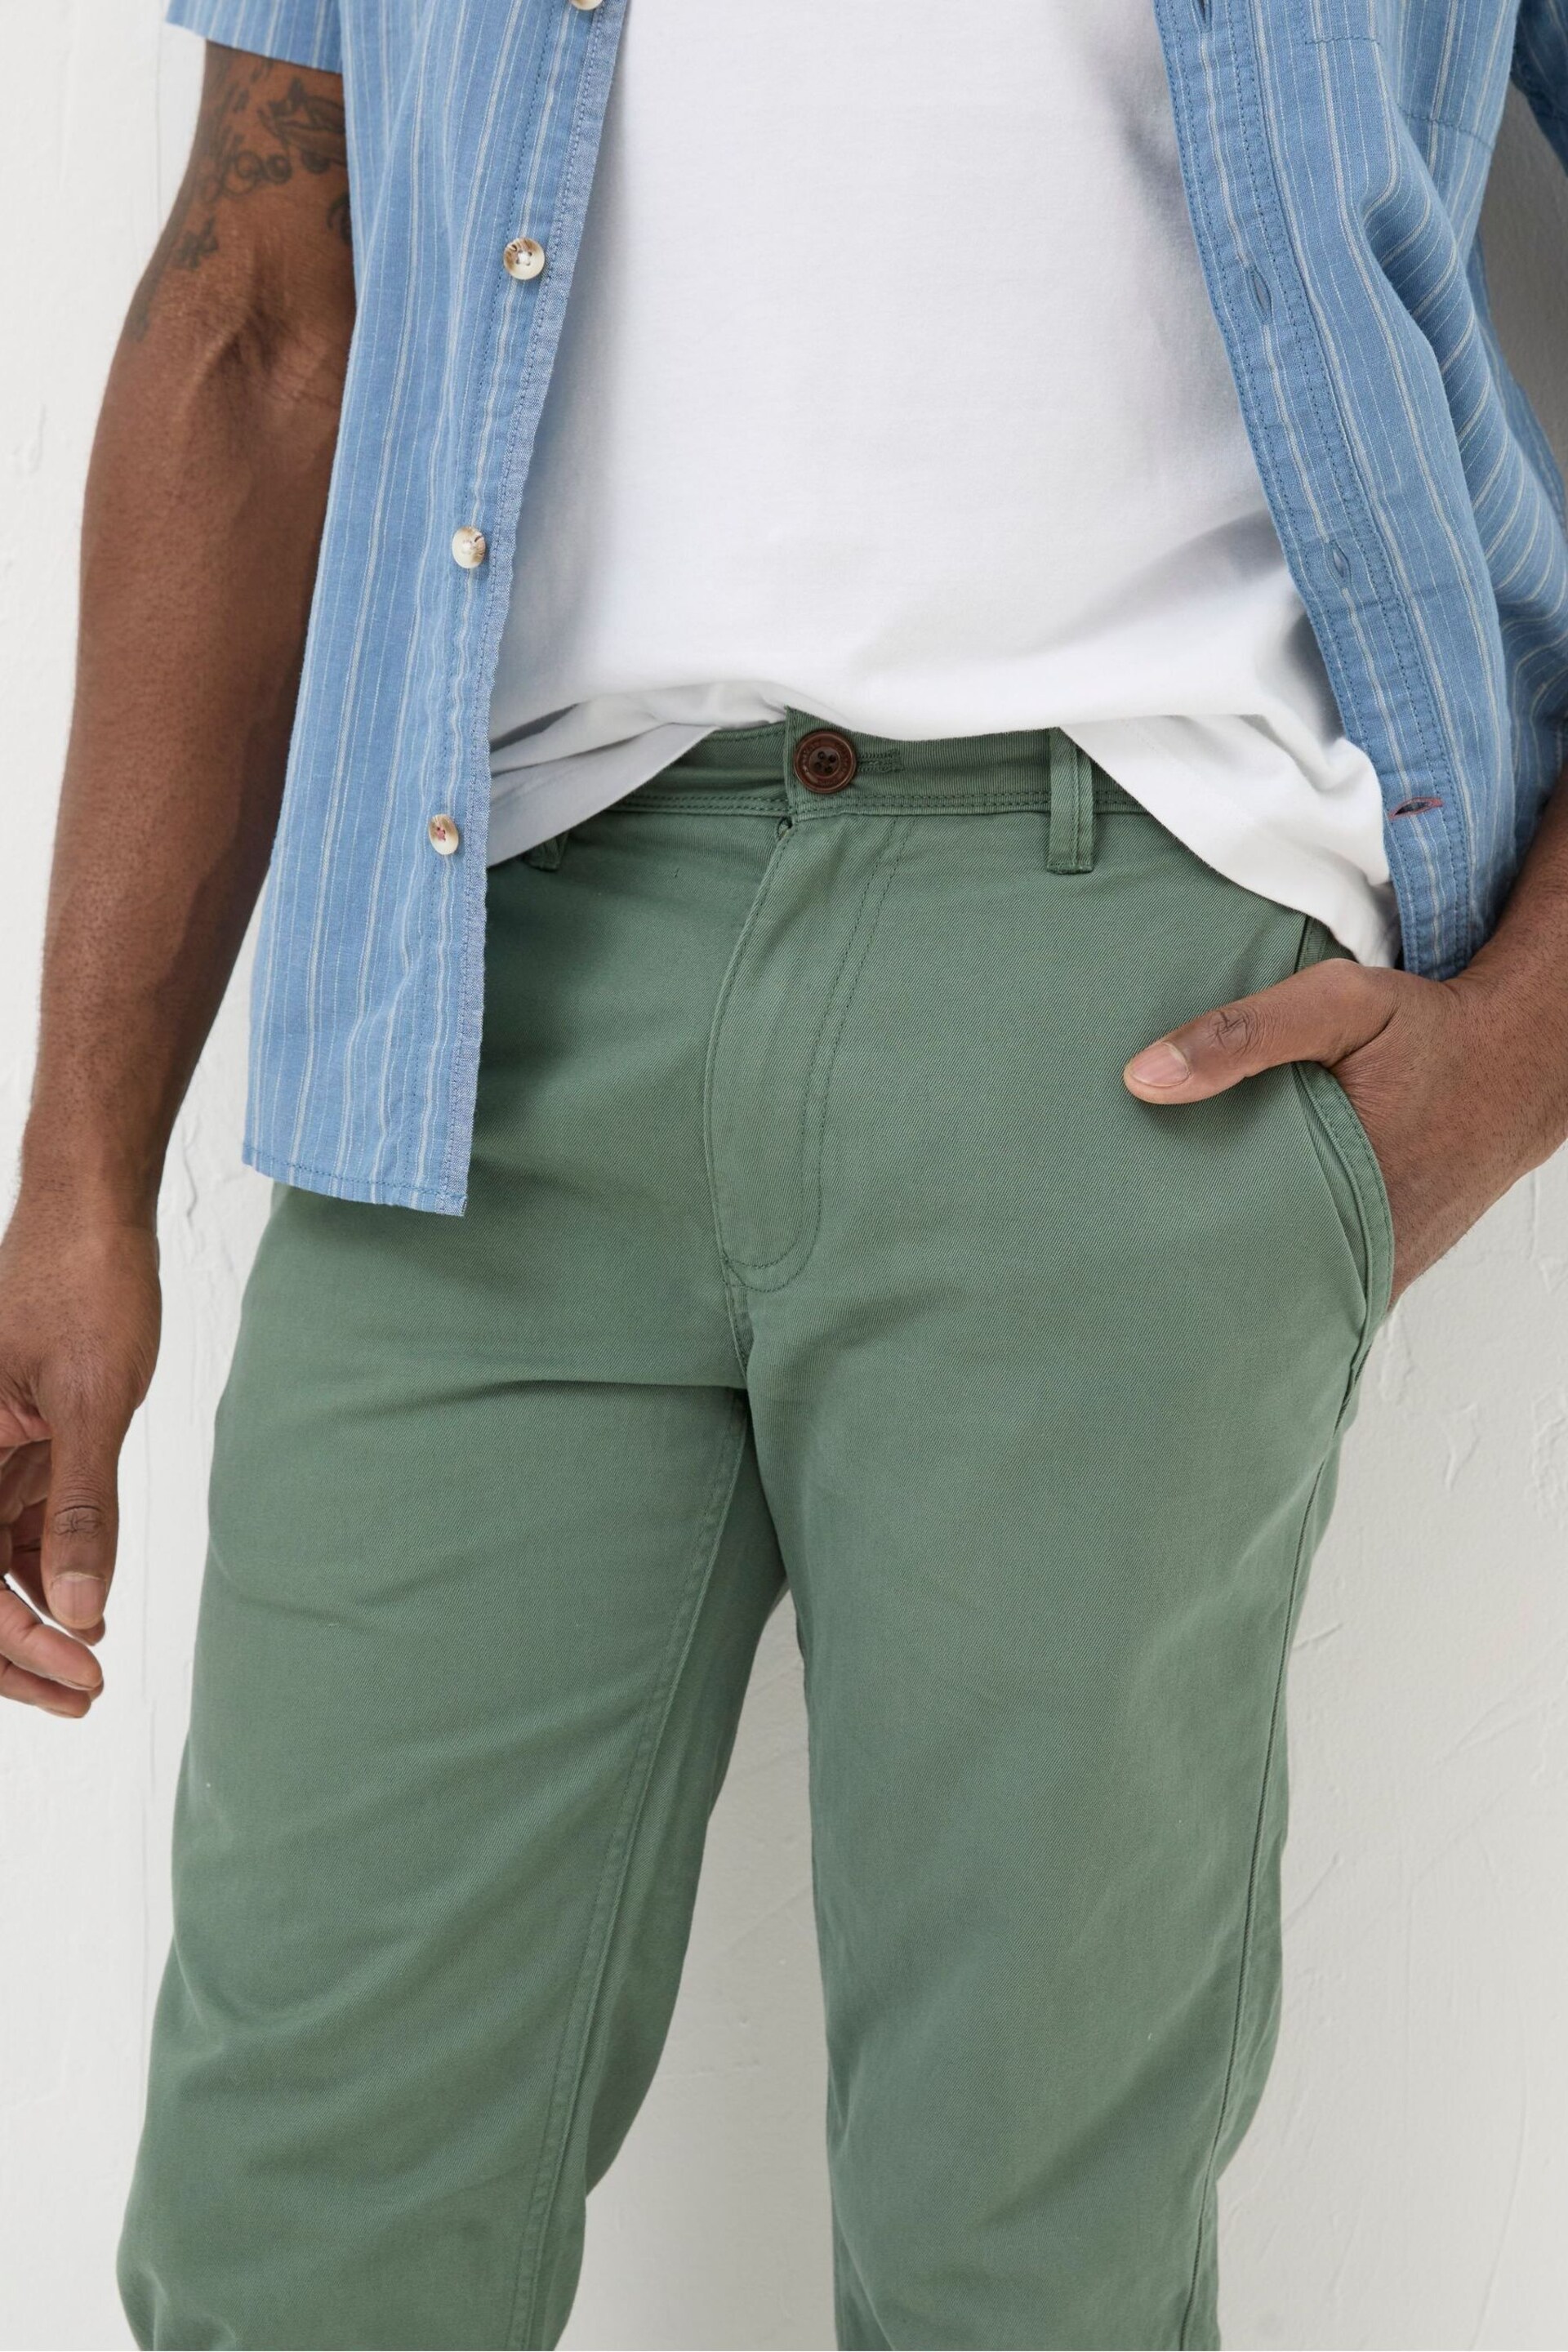 FatFace Green Modern Coastal Chinos Trousers - Image 4 of 5